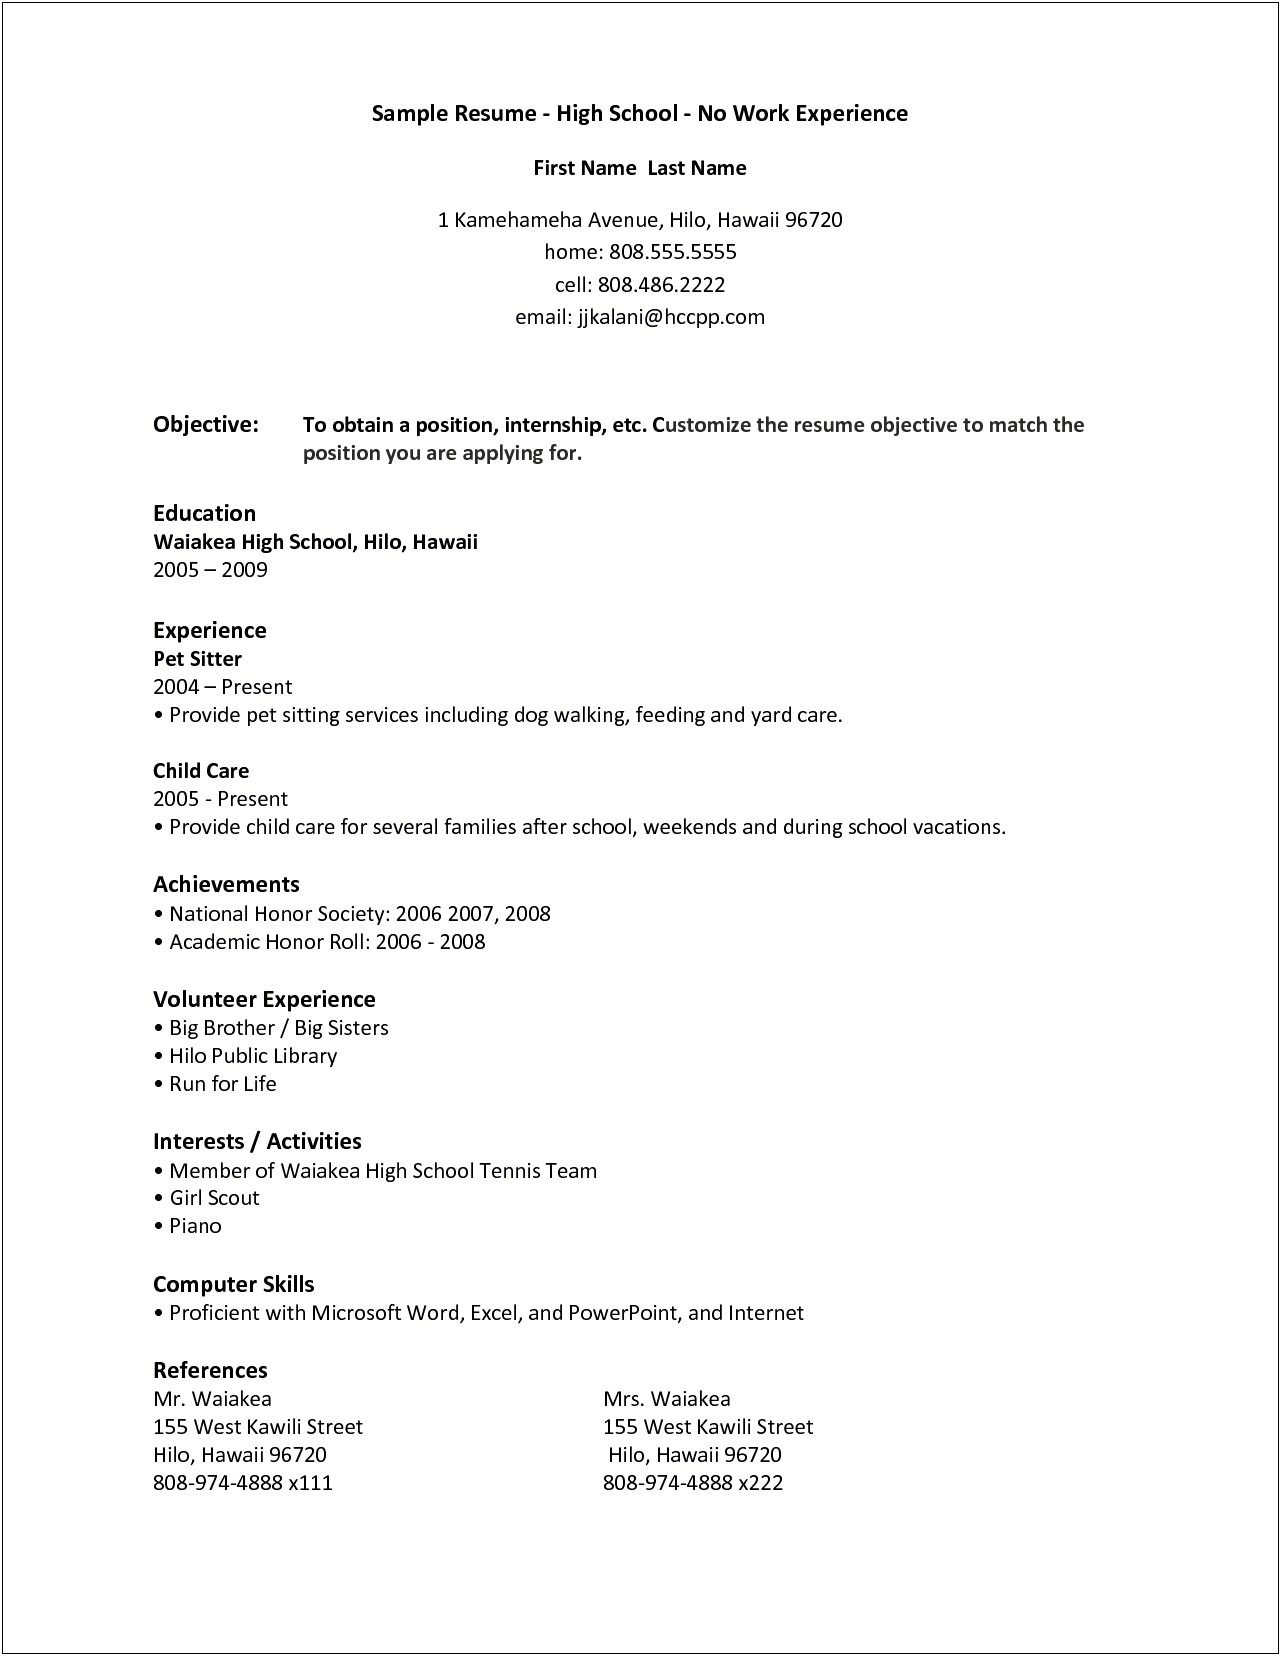 Resume For.a Homemaker Looking For A Job